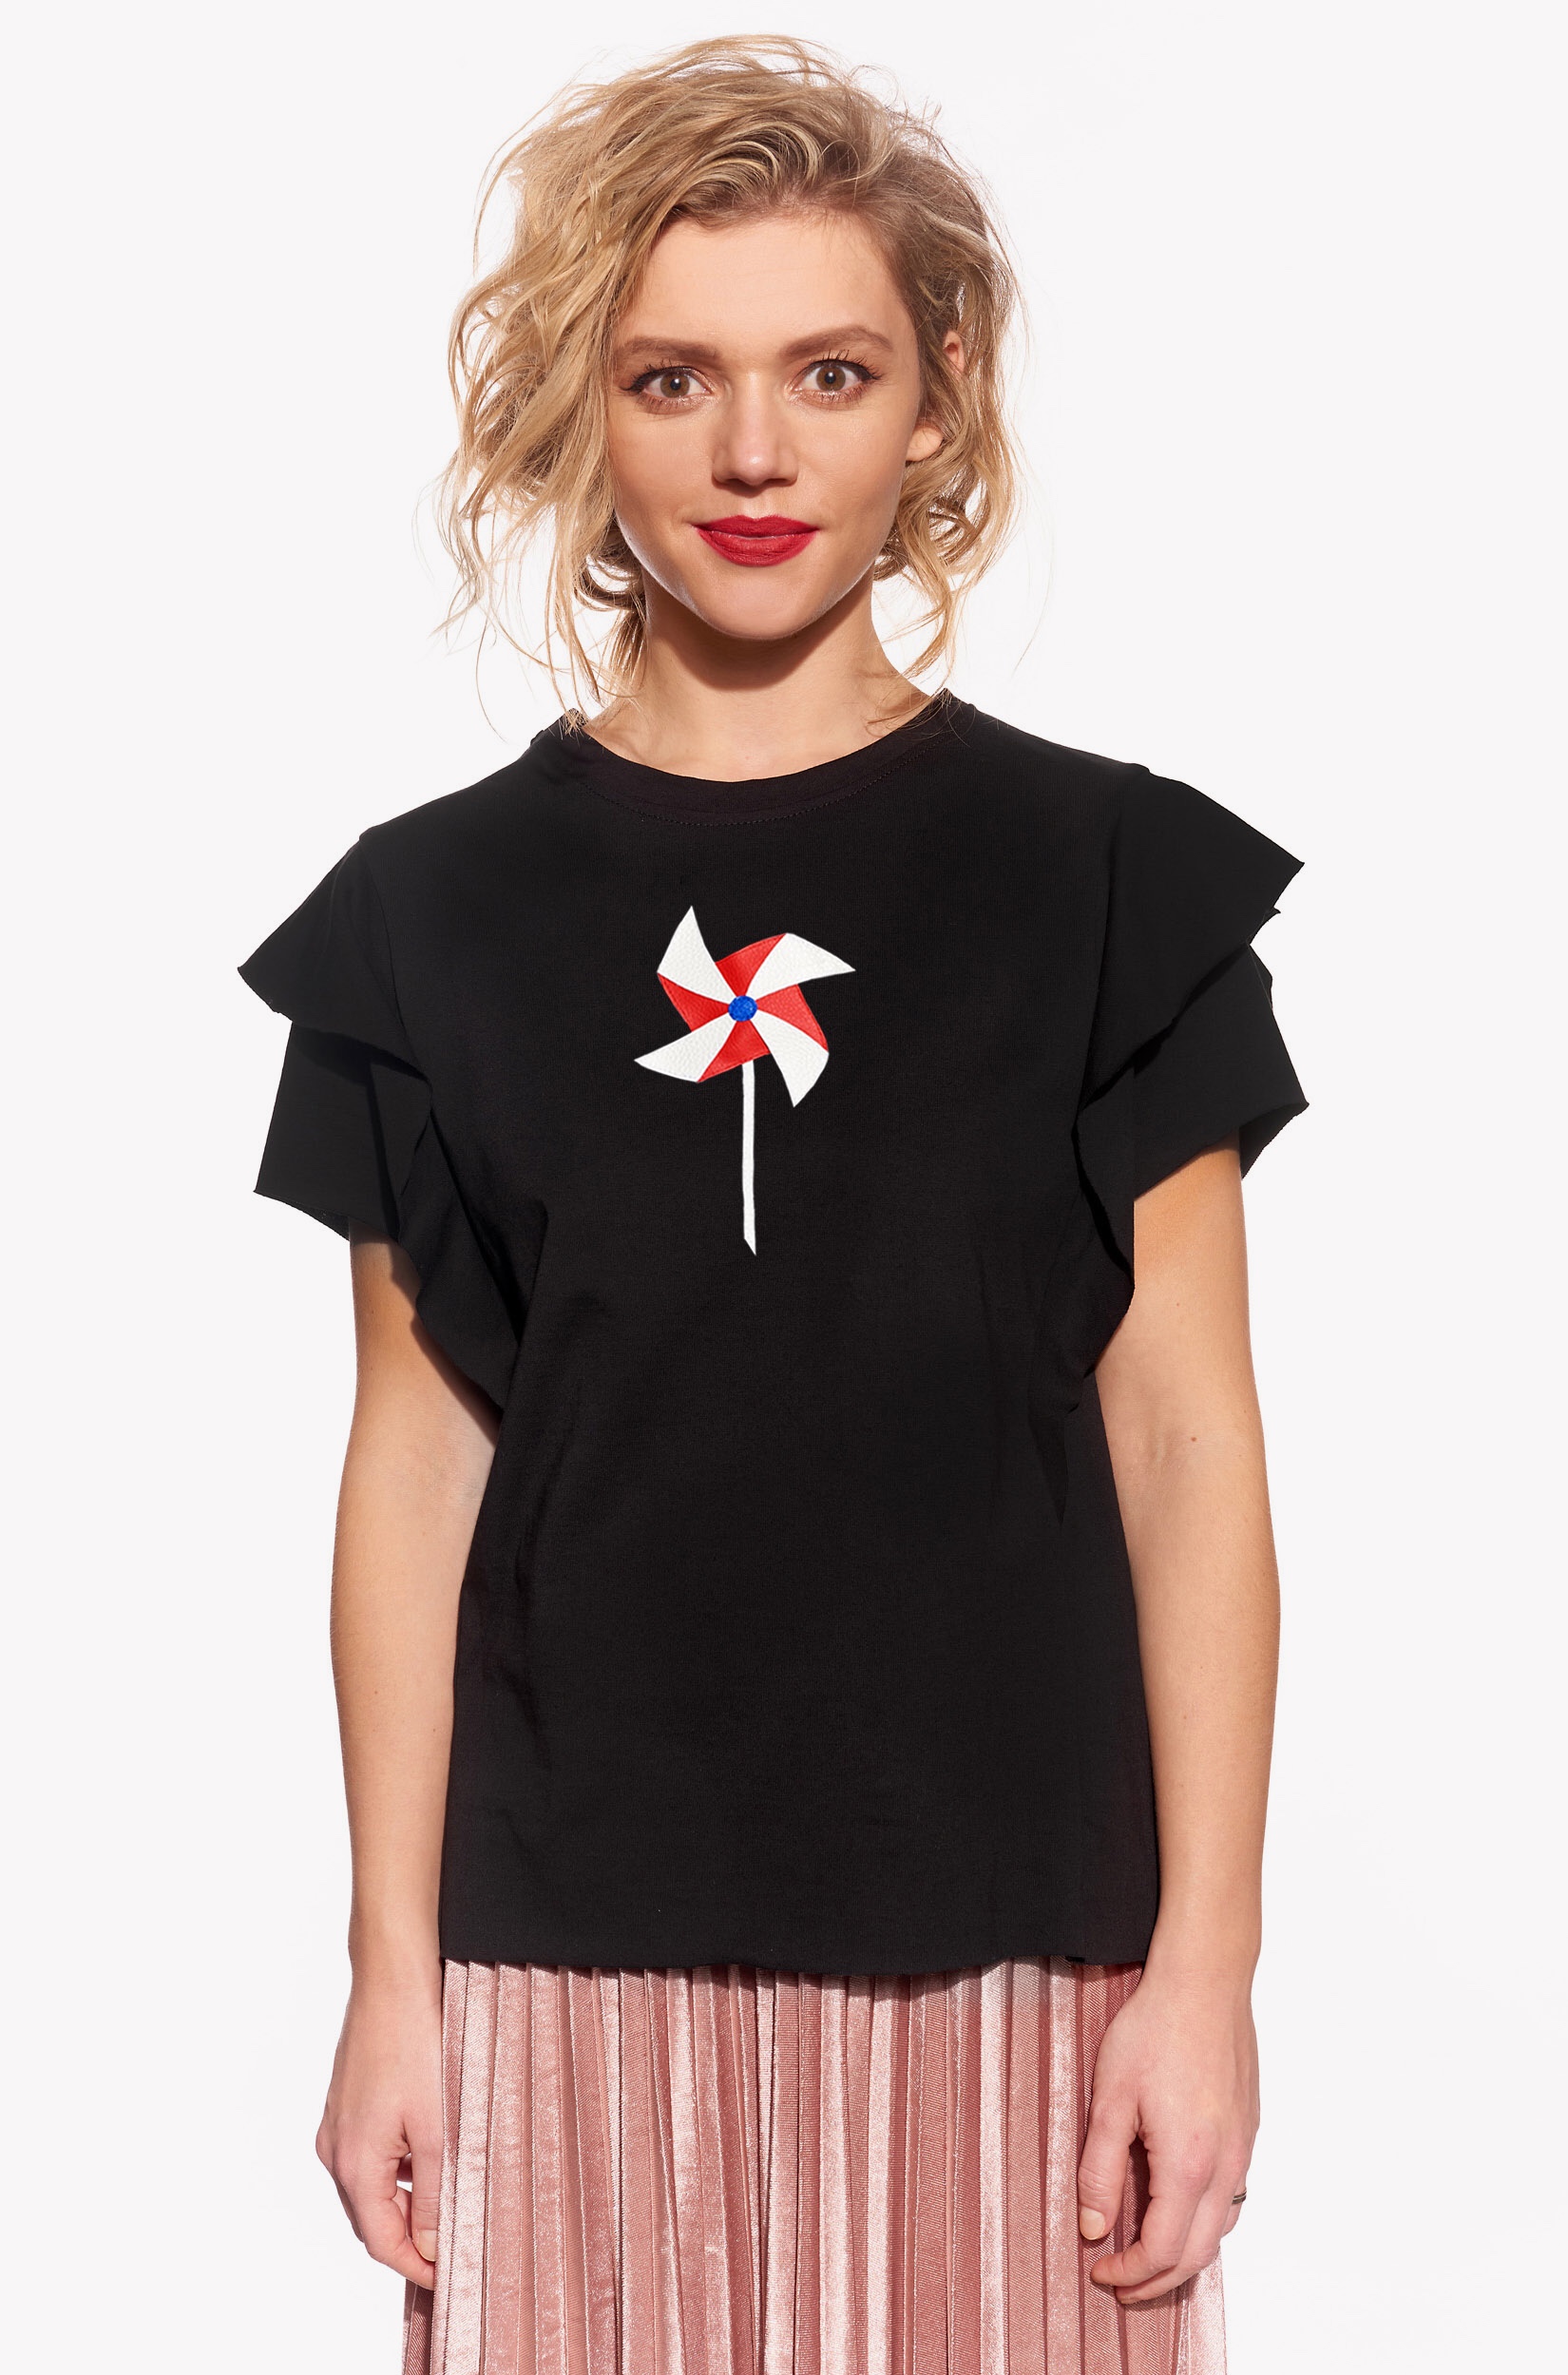 Shirt with paper propeller